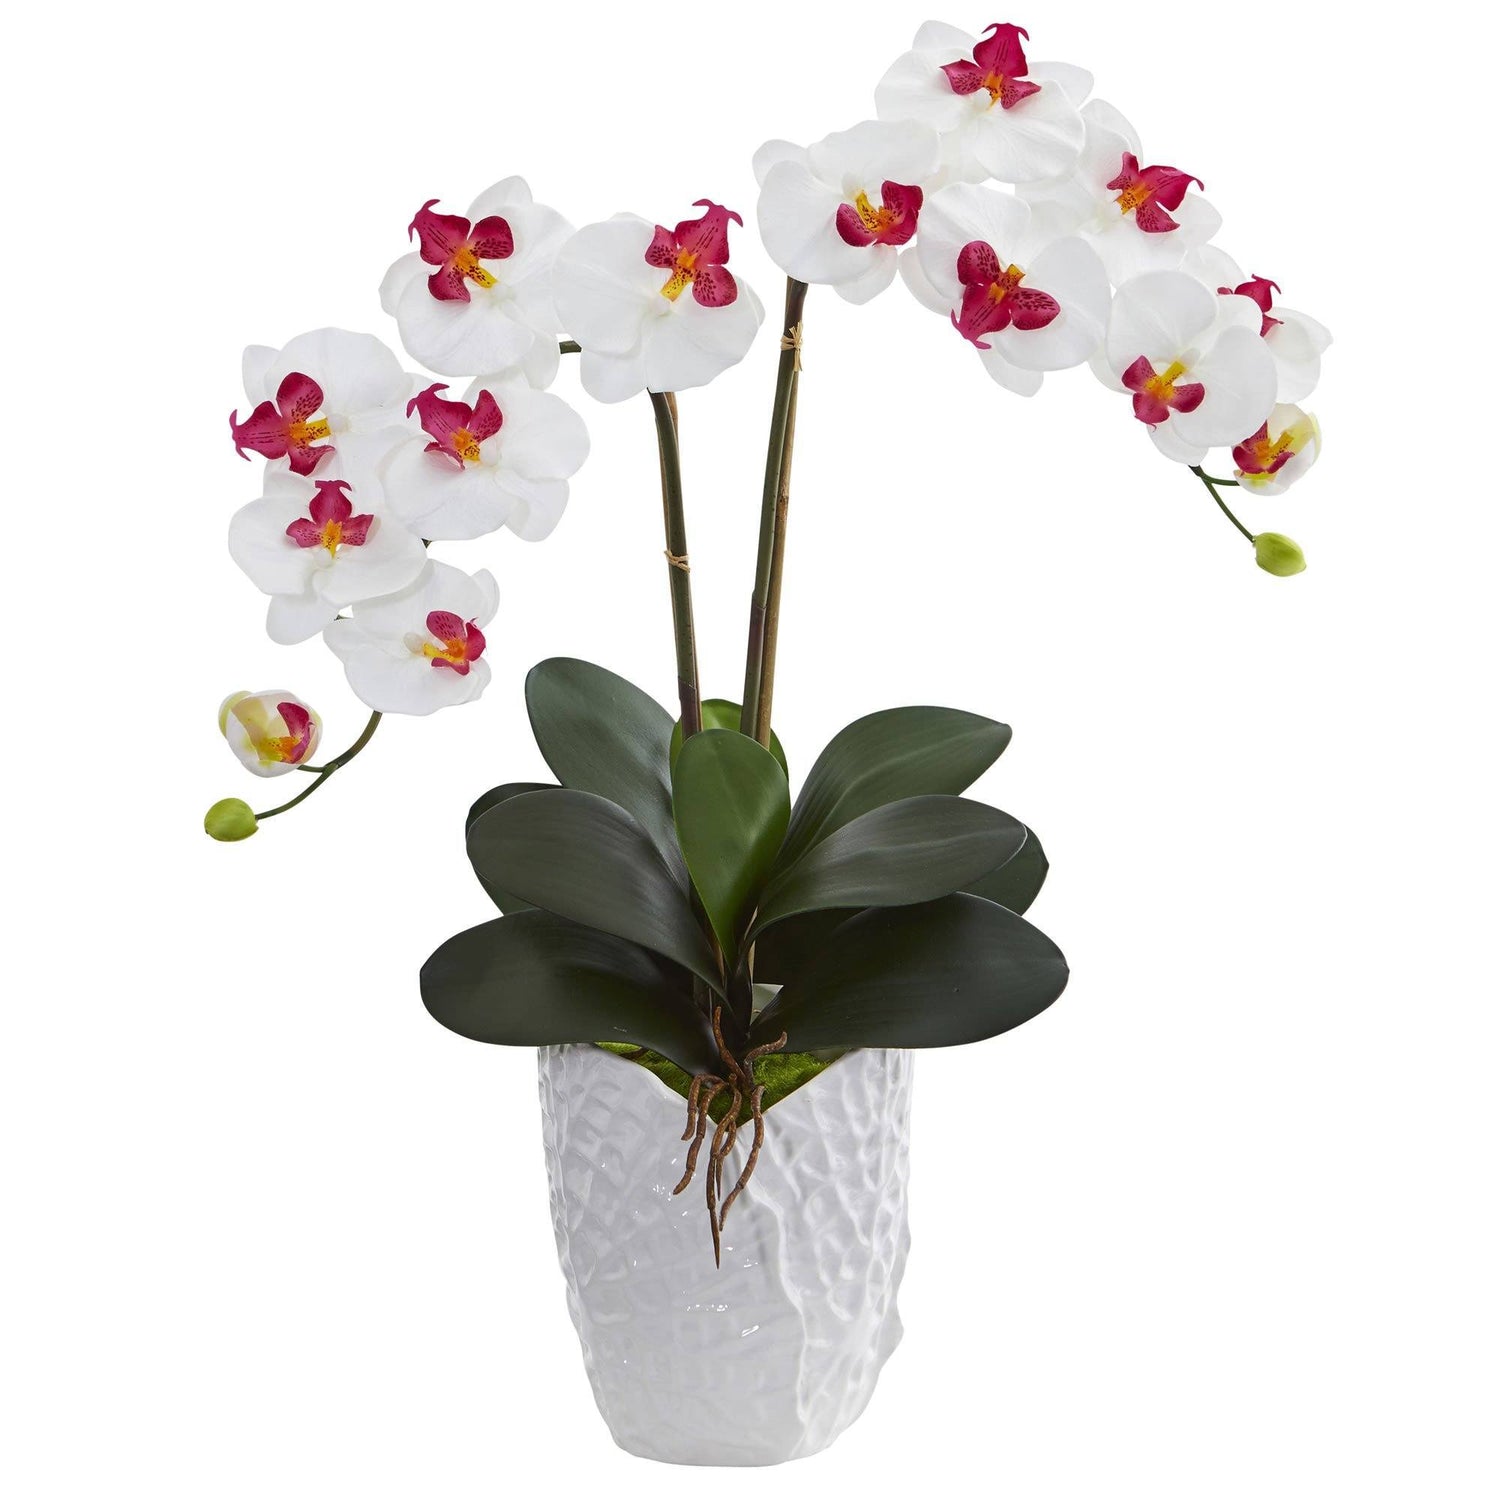 Double Phalaenopsis Orchid in White Vase